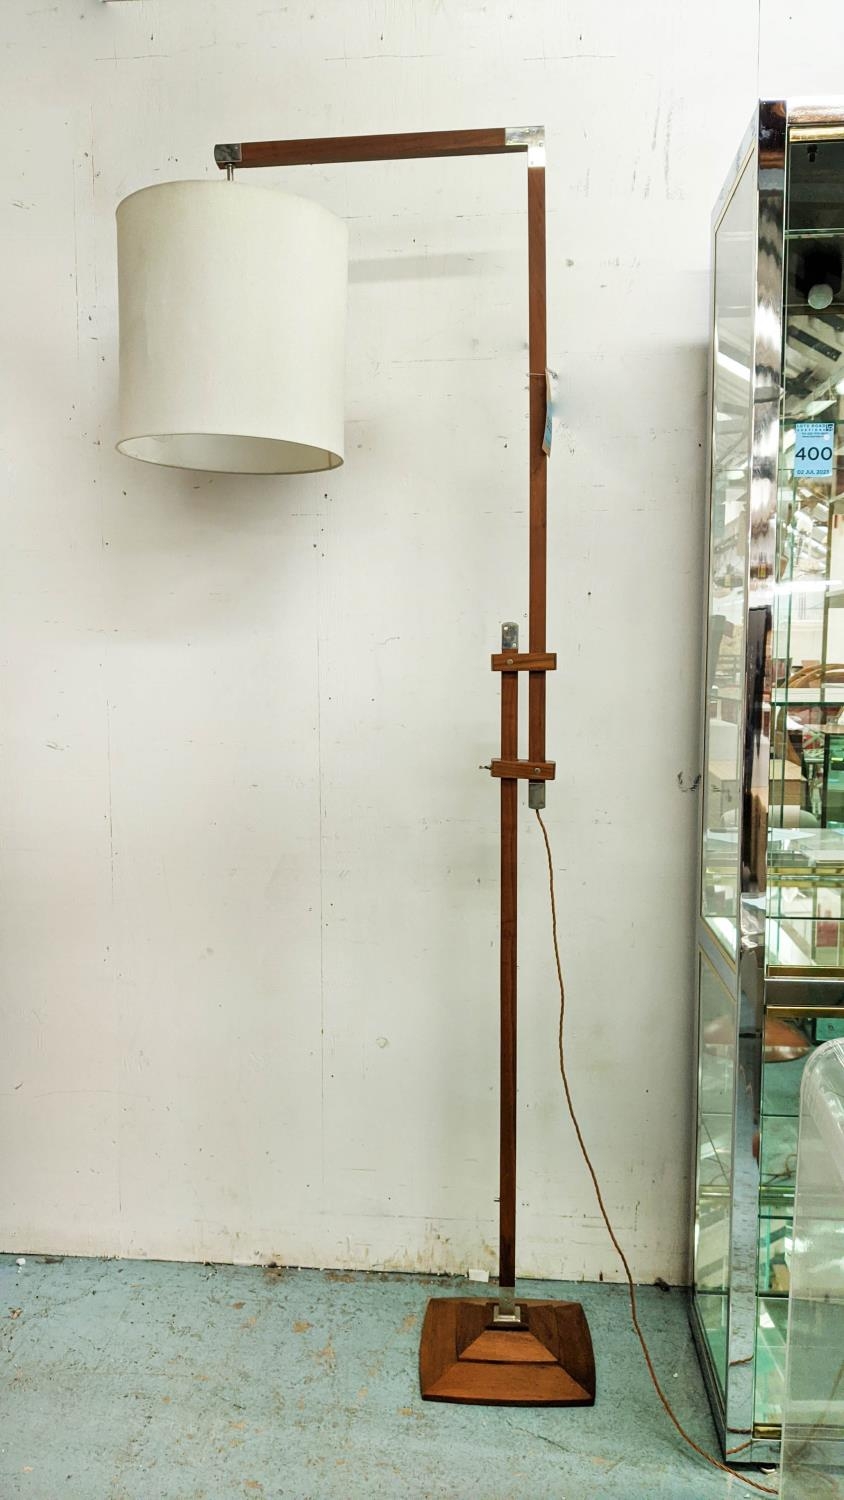 LINLEY FLOOR LAMP, by David Linley, with shape, height adjustable, 208cm H at tallest.